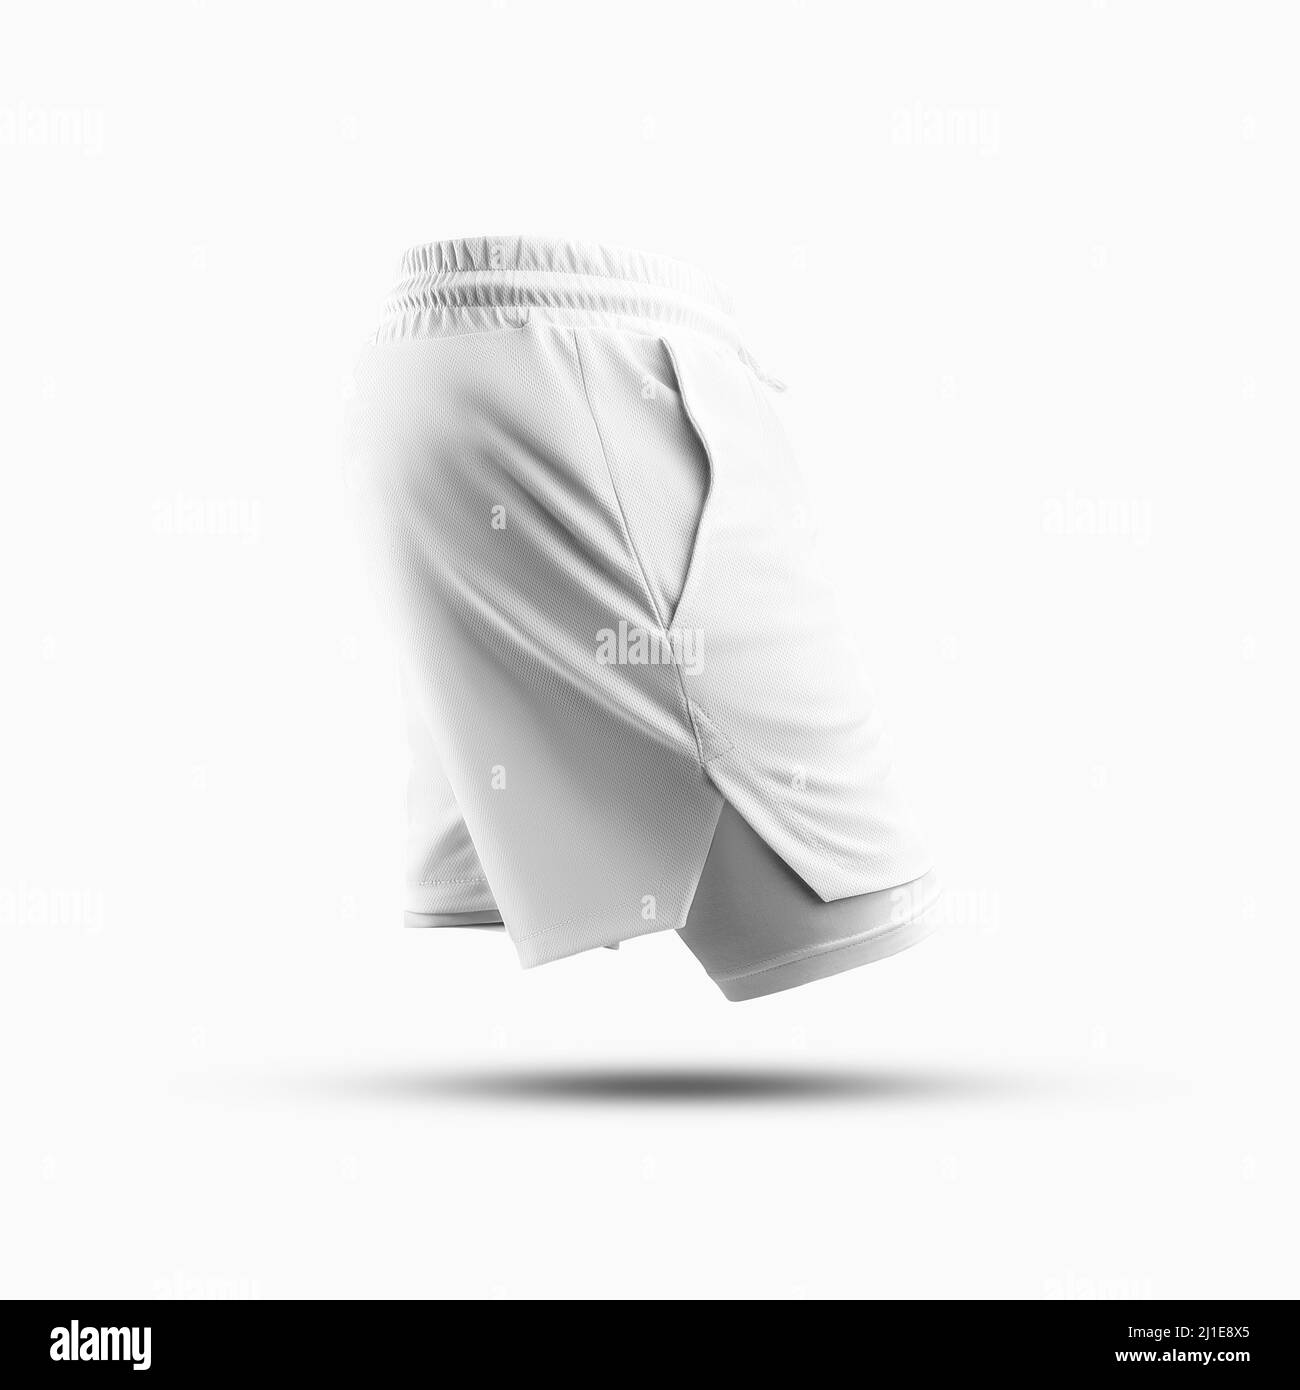 Mockup of sports white men's shorts with underpants. Sportswear isolated on a white background. 3D rendering. Side view Stock Photo